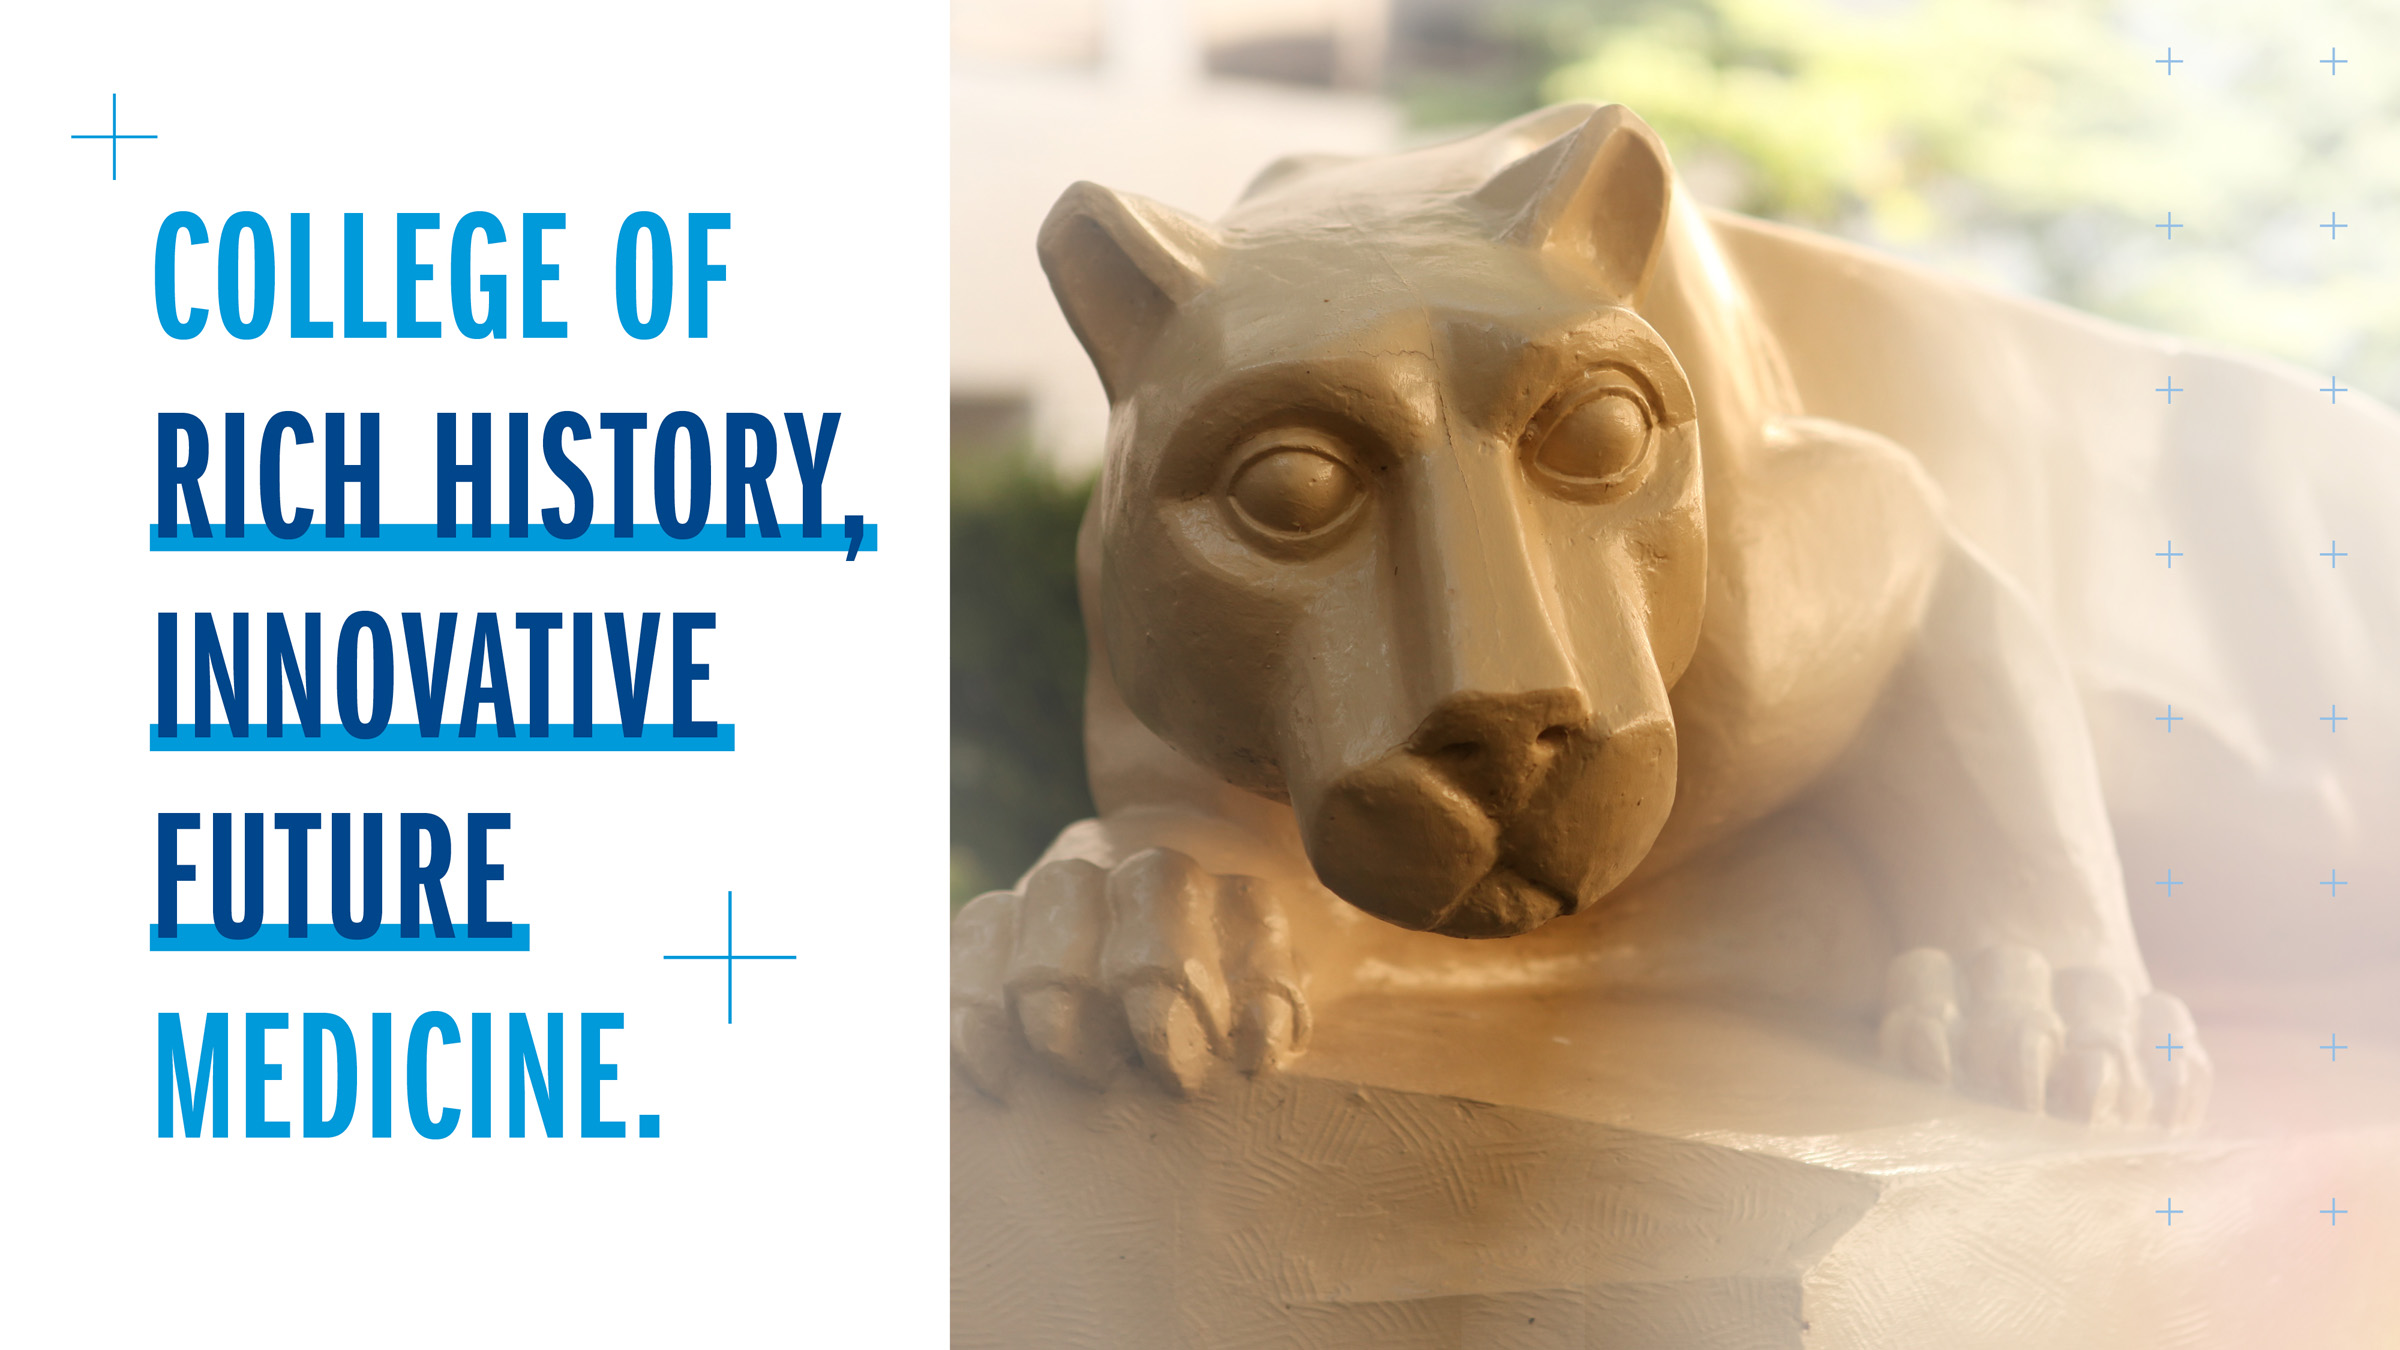 College of Rich History, Innovative Future Medicine with Nittany Lion statue